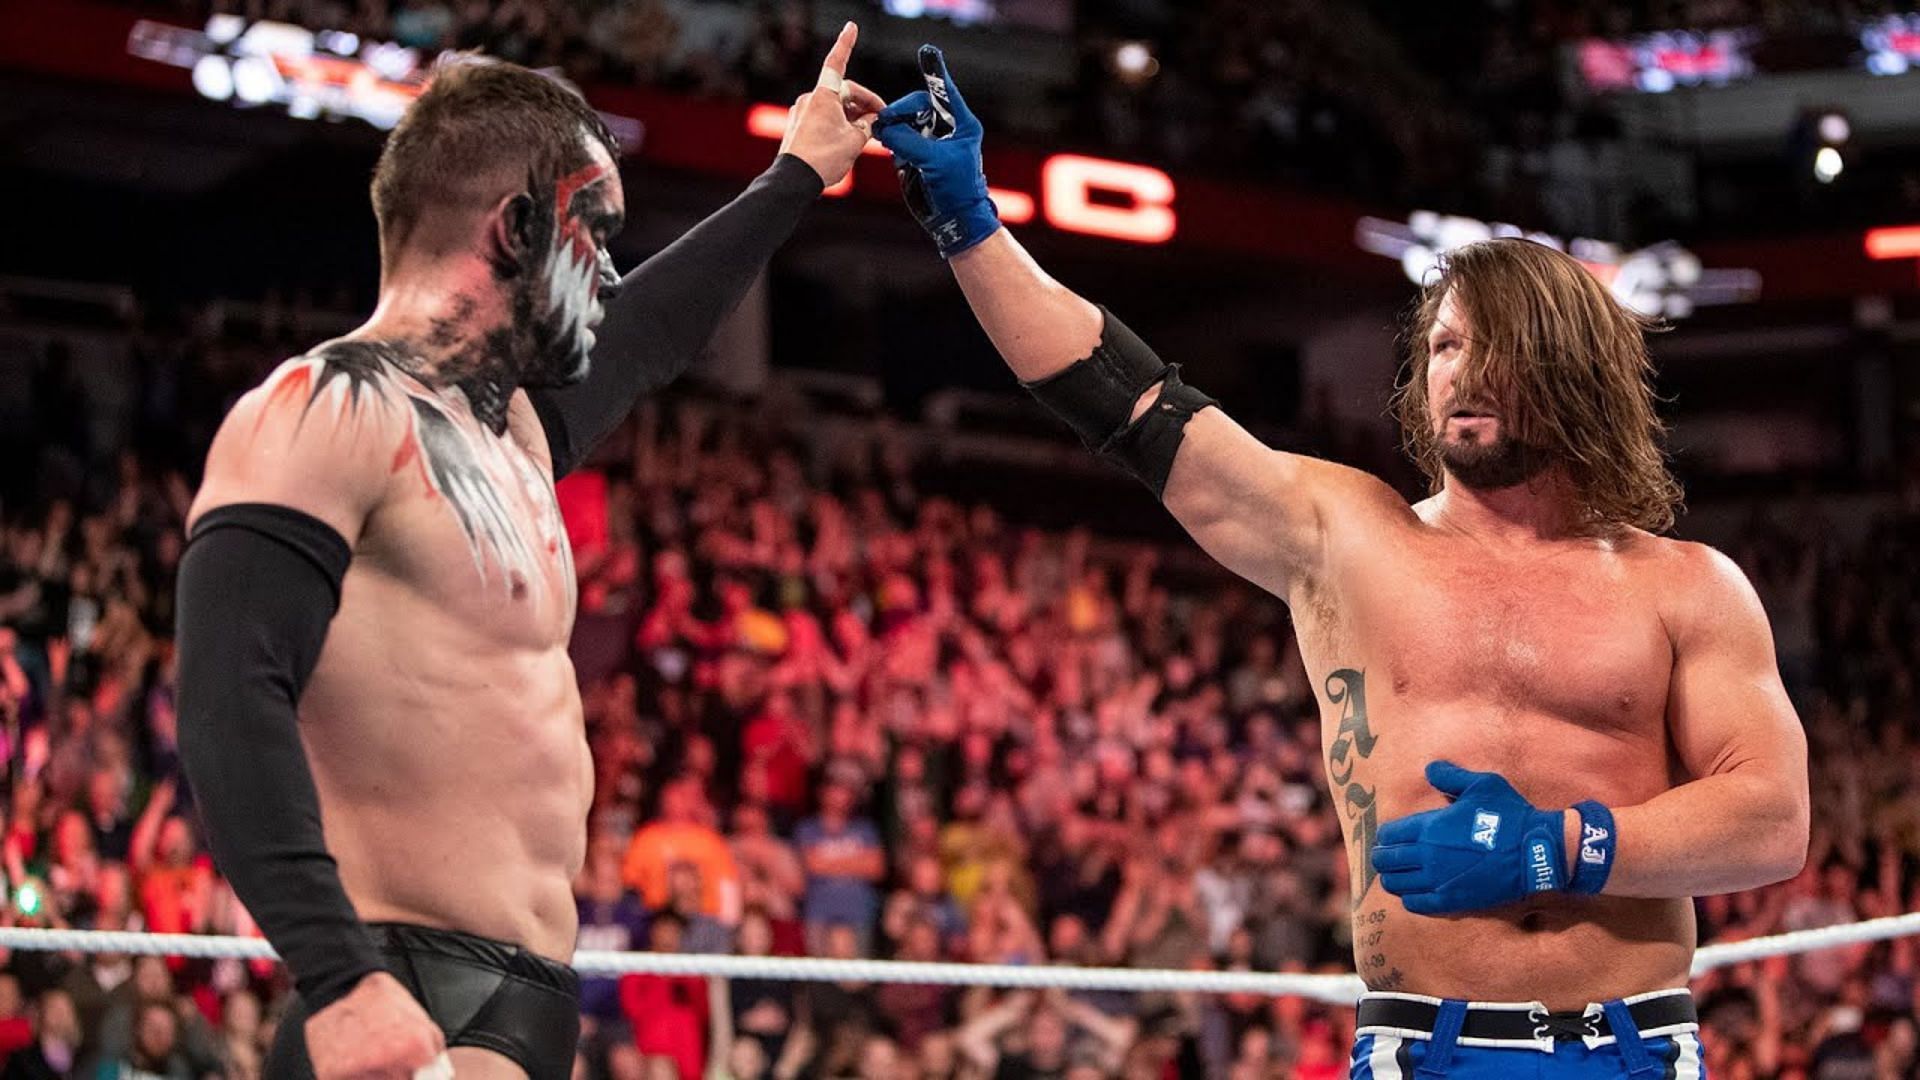 Will Finn Balor and AJ Styles join hands in the future?